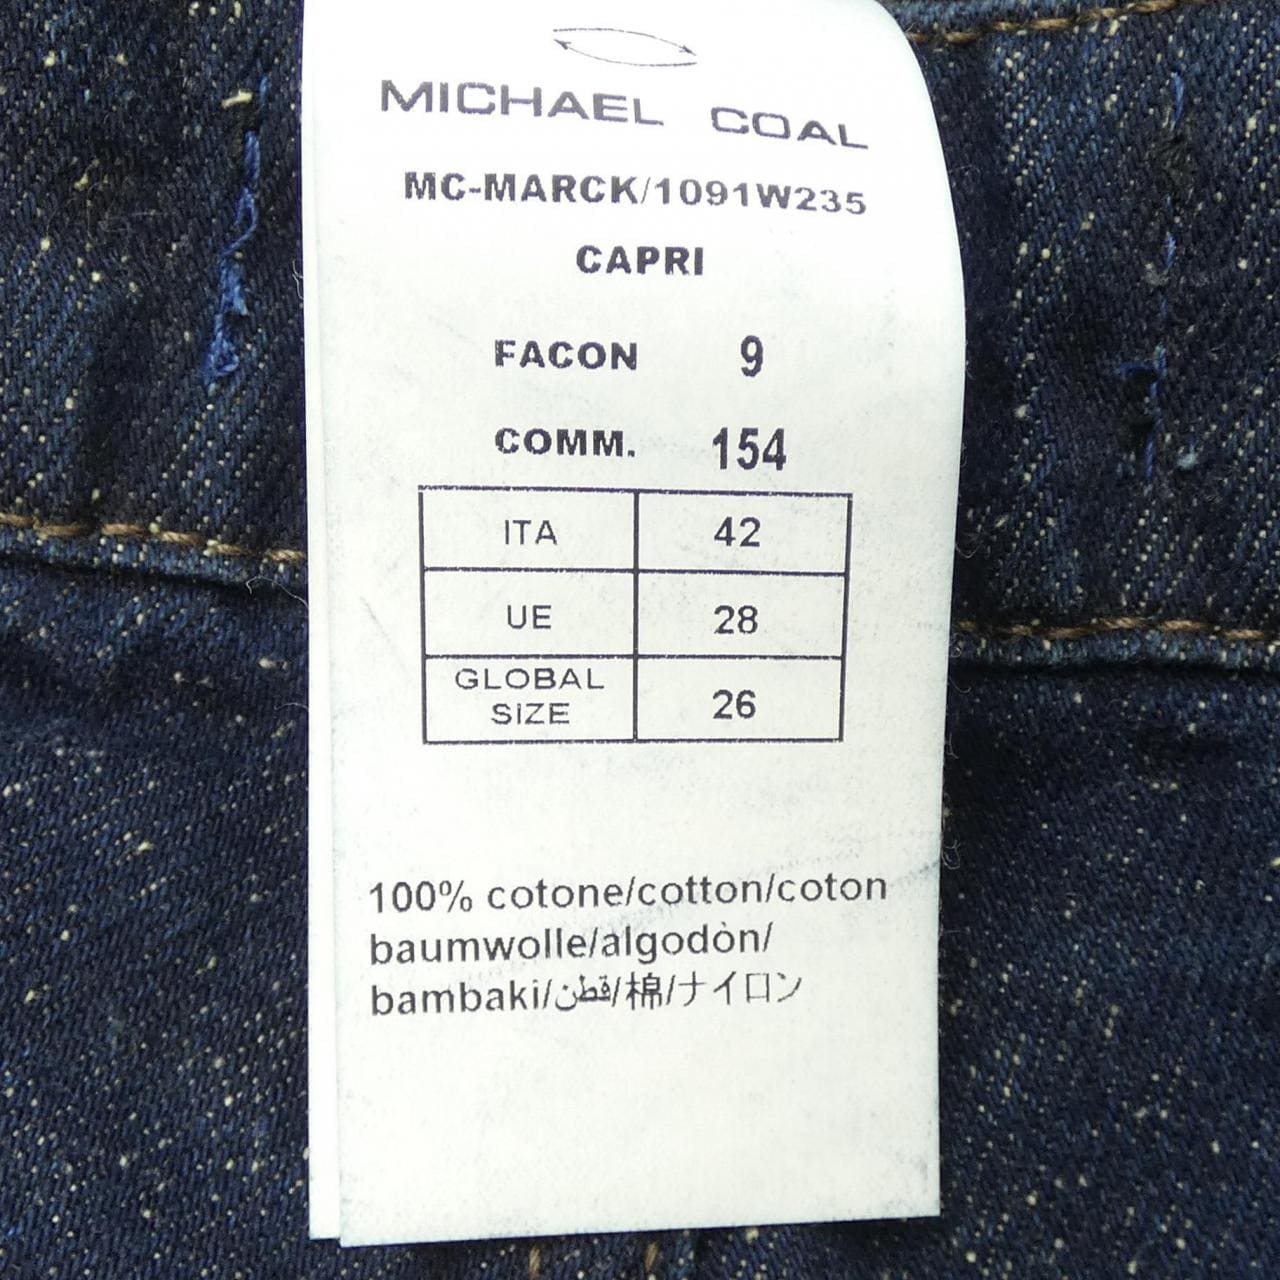 MICHAELCOAL JEANS